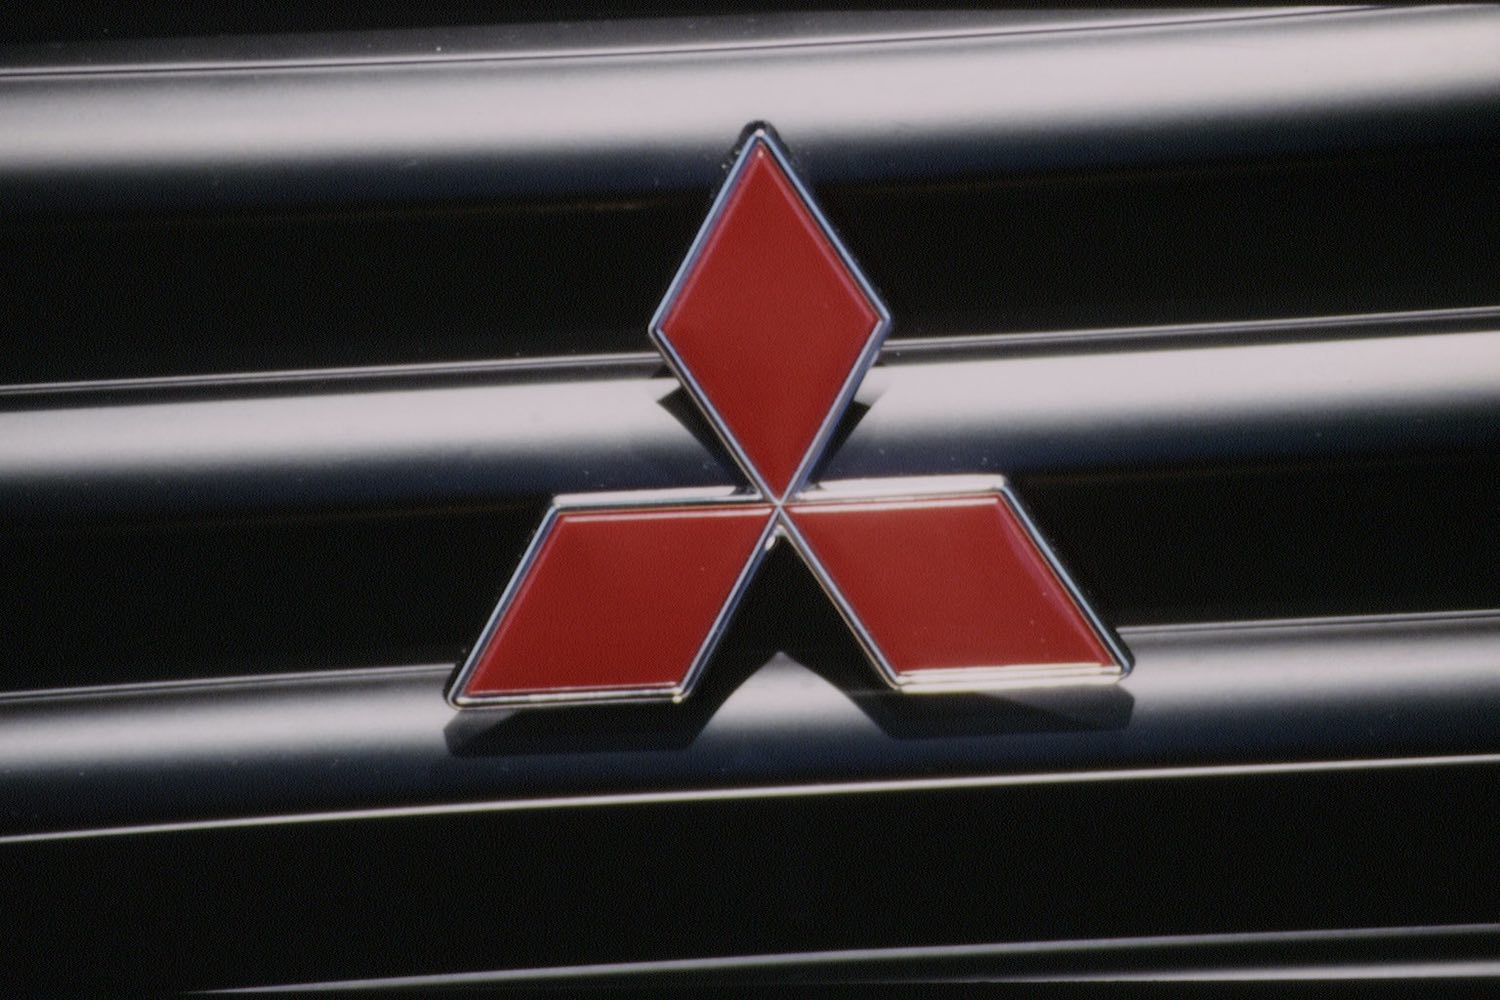 The Mitsubishi logo on an old Mighty Mountain Max 4WD compact pickup truck's grille.